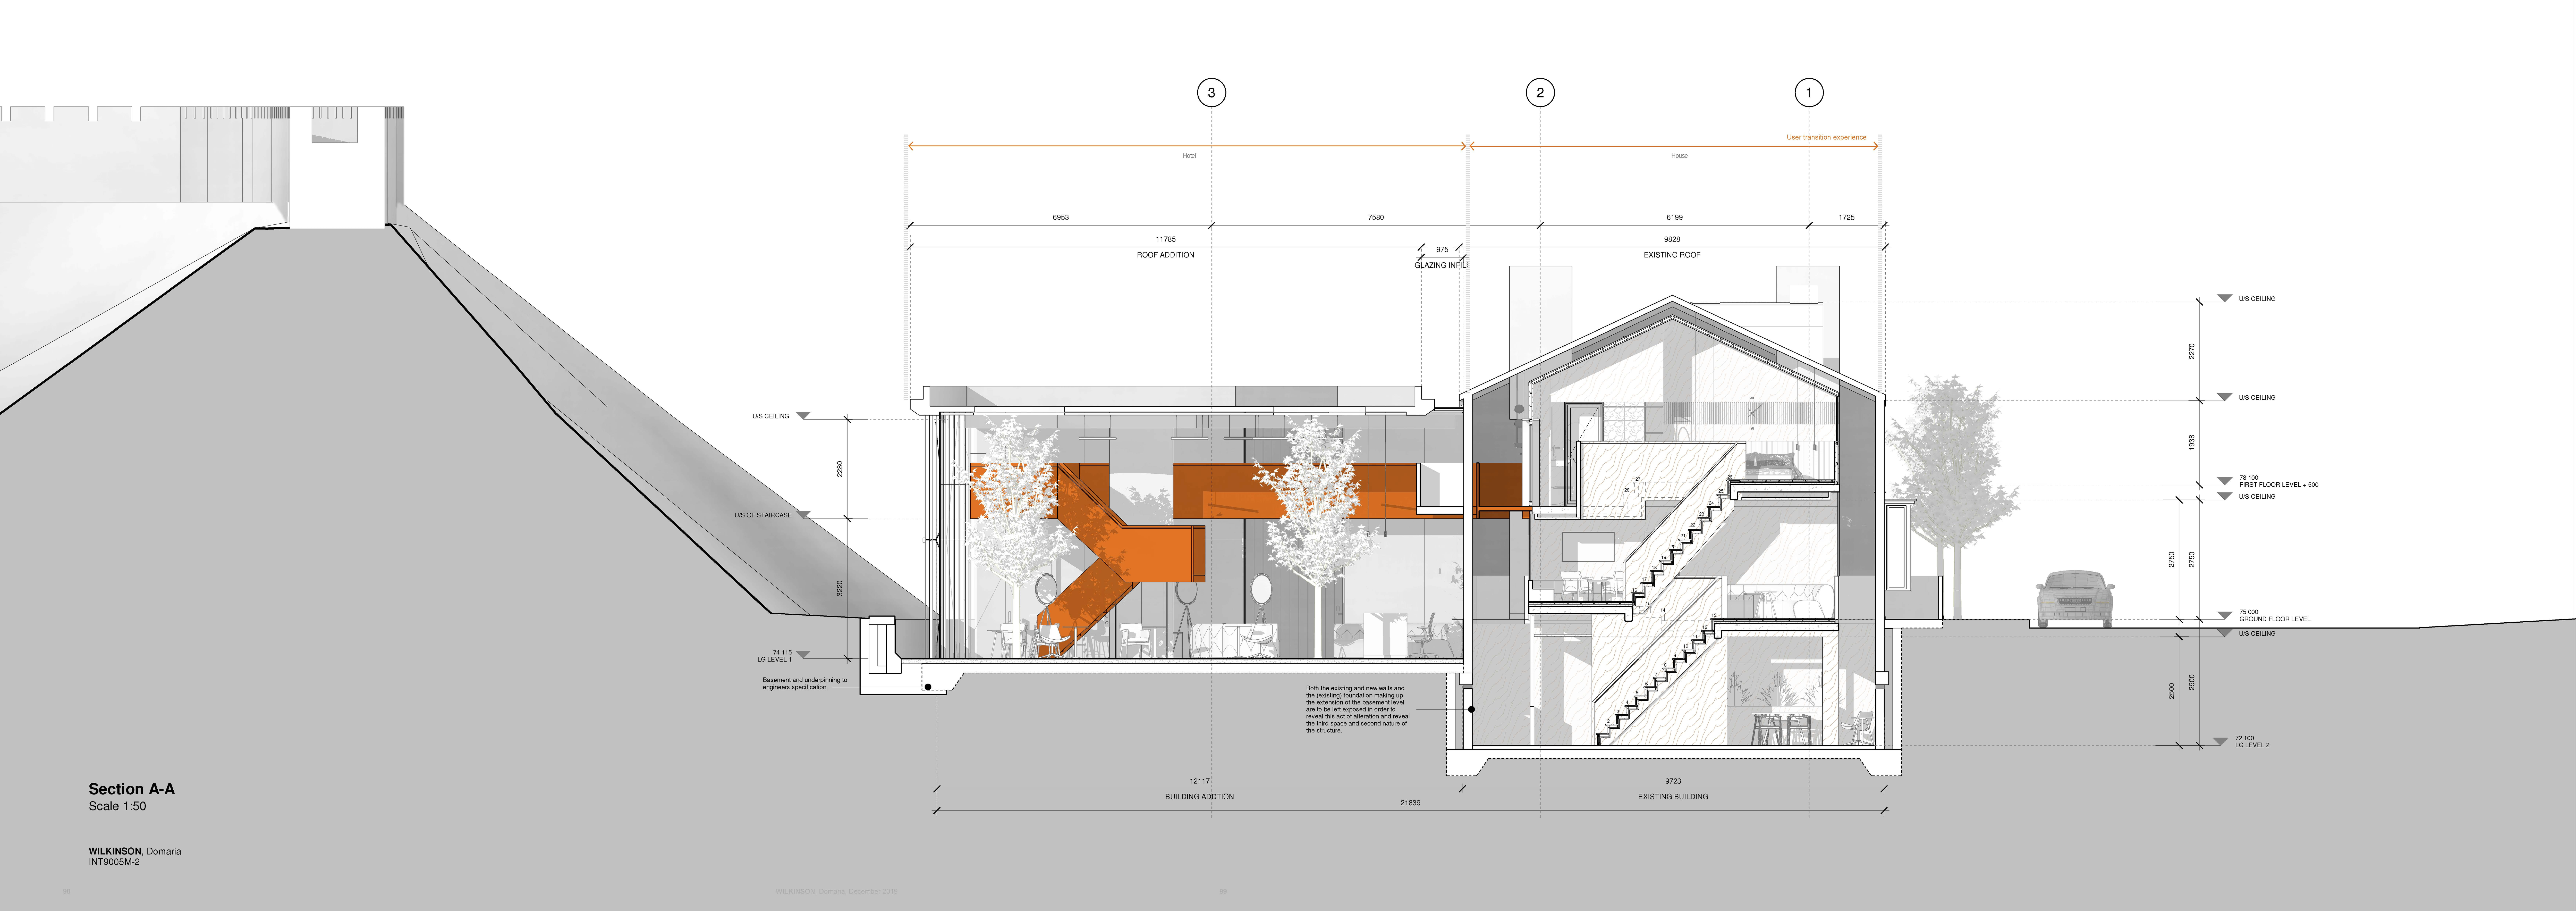 Cross-section of building design depicting the main 'threshold' gallery.